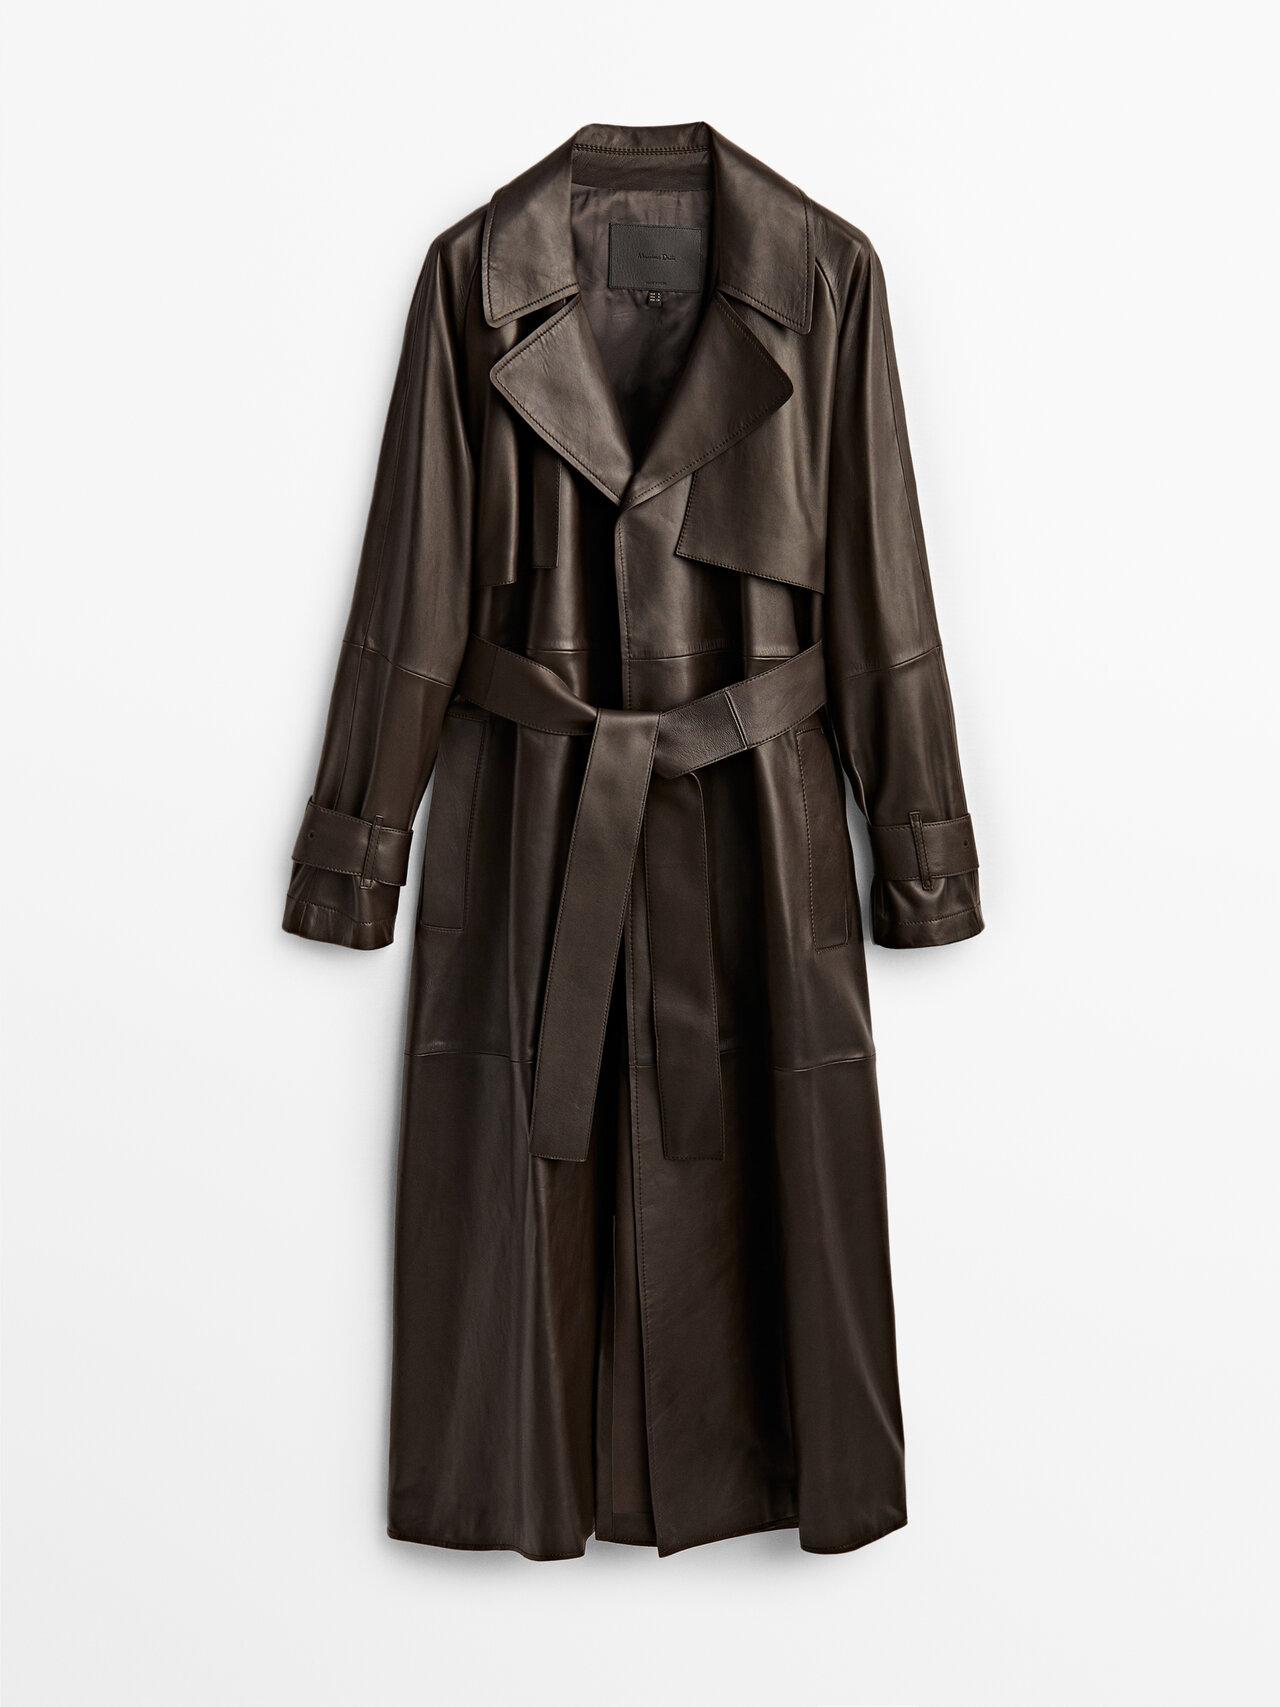 MASSIMO DUTTI Nappa Leather Coat With Belt in Brown | Lyst